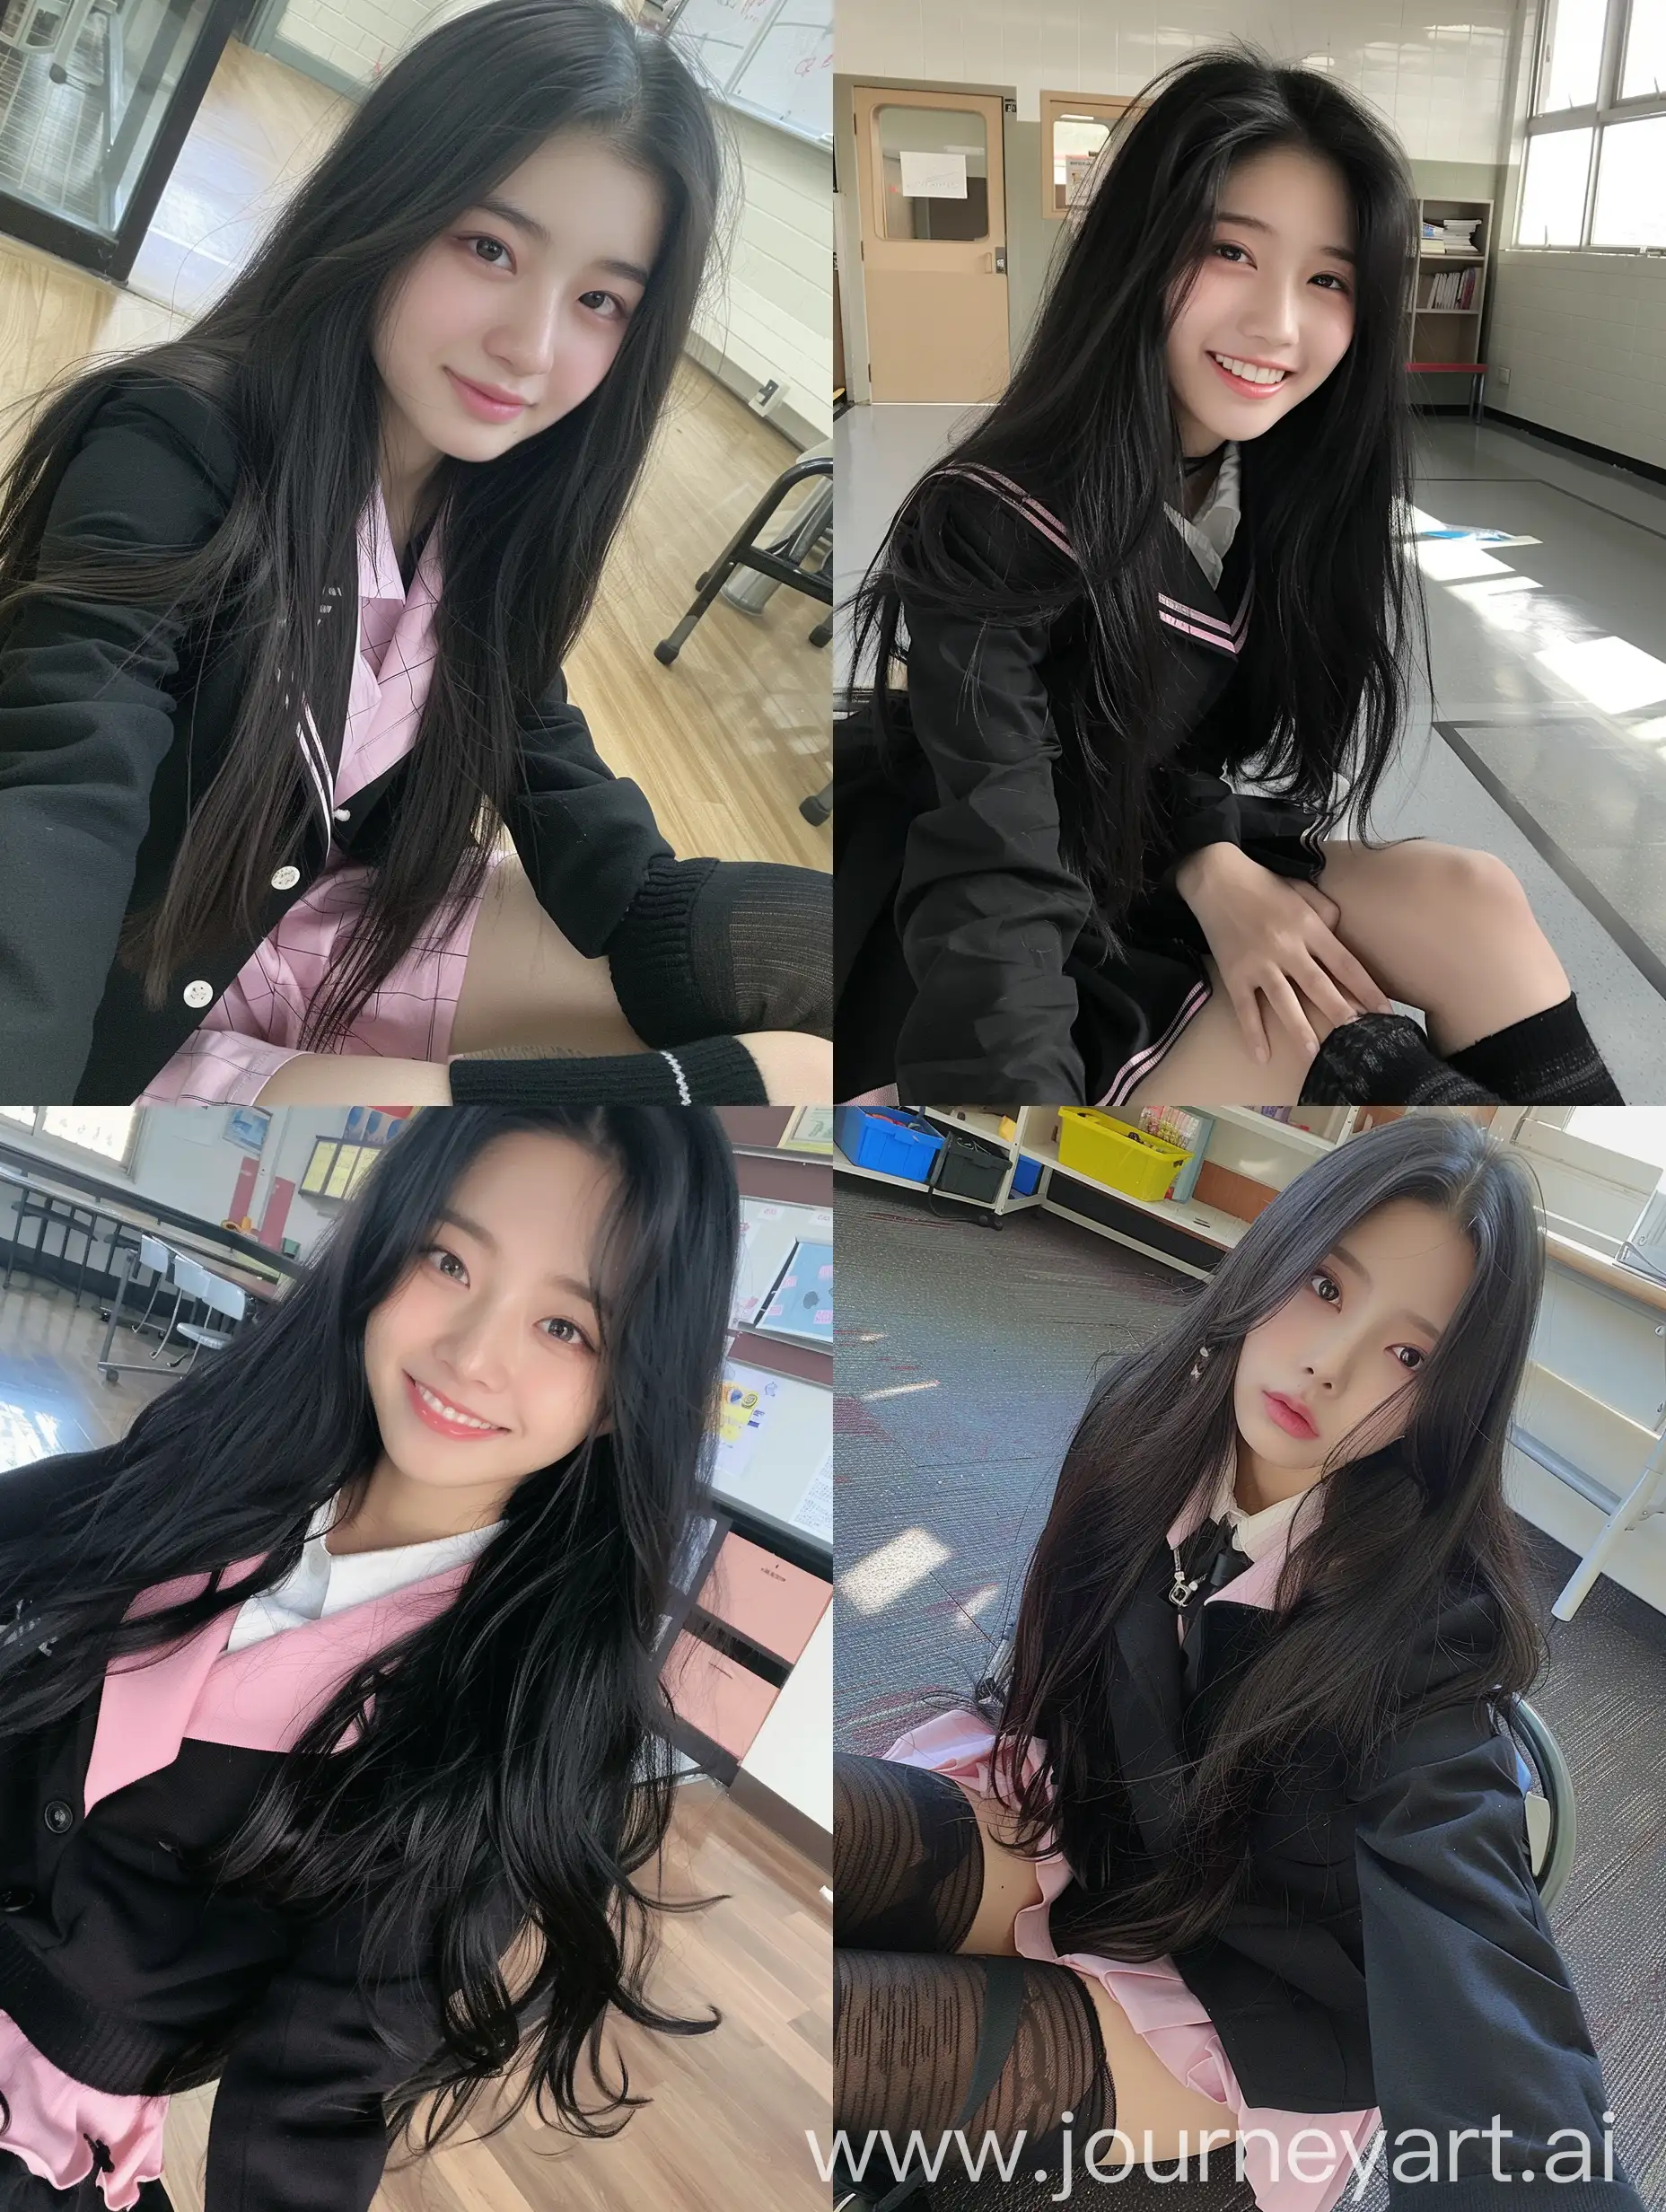 1 korean  girl,    long black hair ,   22  years  old,    influencer,    beauty   ,     in  the  school    ,school black and pink  uniform  ,  makeup,   smiling, floor view,      sitting  on  chair  ,    socks  and  boots,    no  effect,     selfie   , iphone  selfie,      no  filters ,   iphone  photo    natural